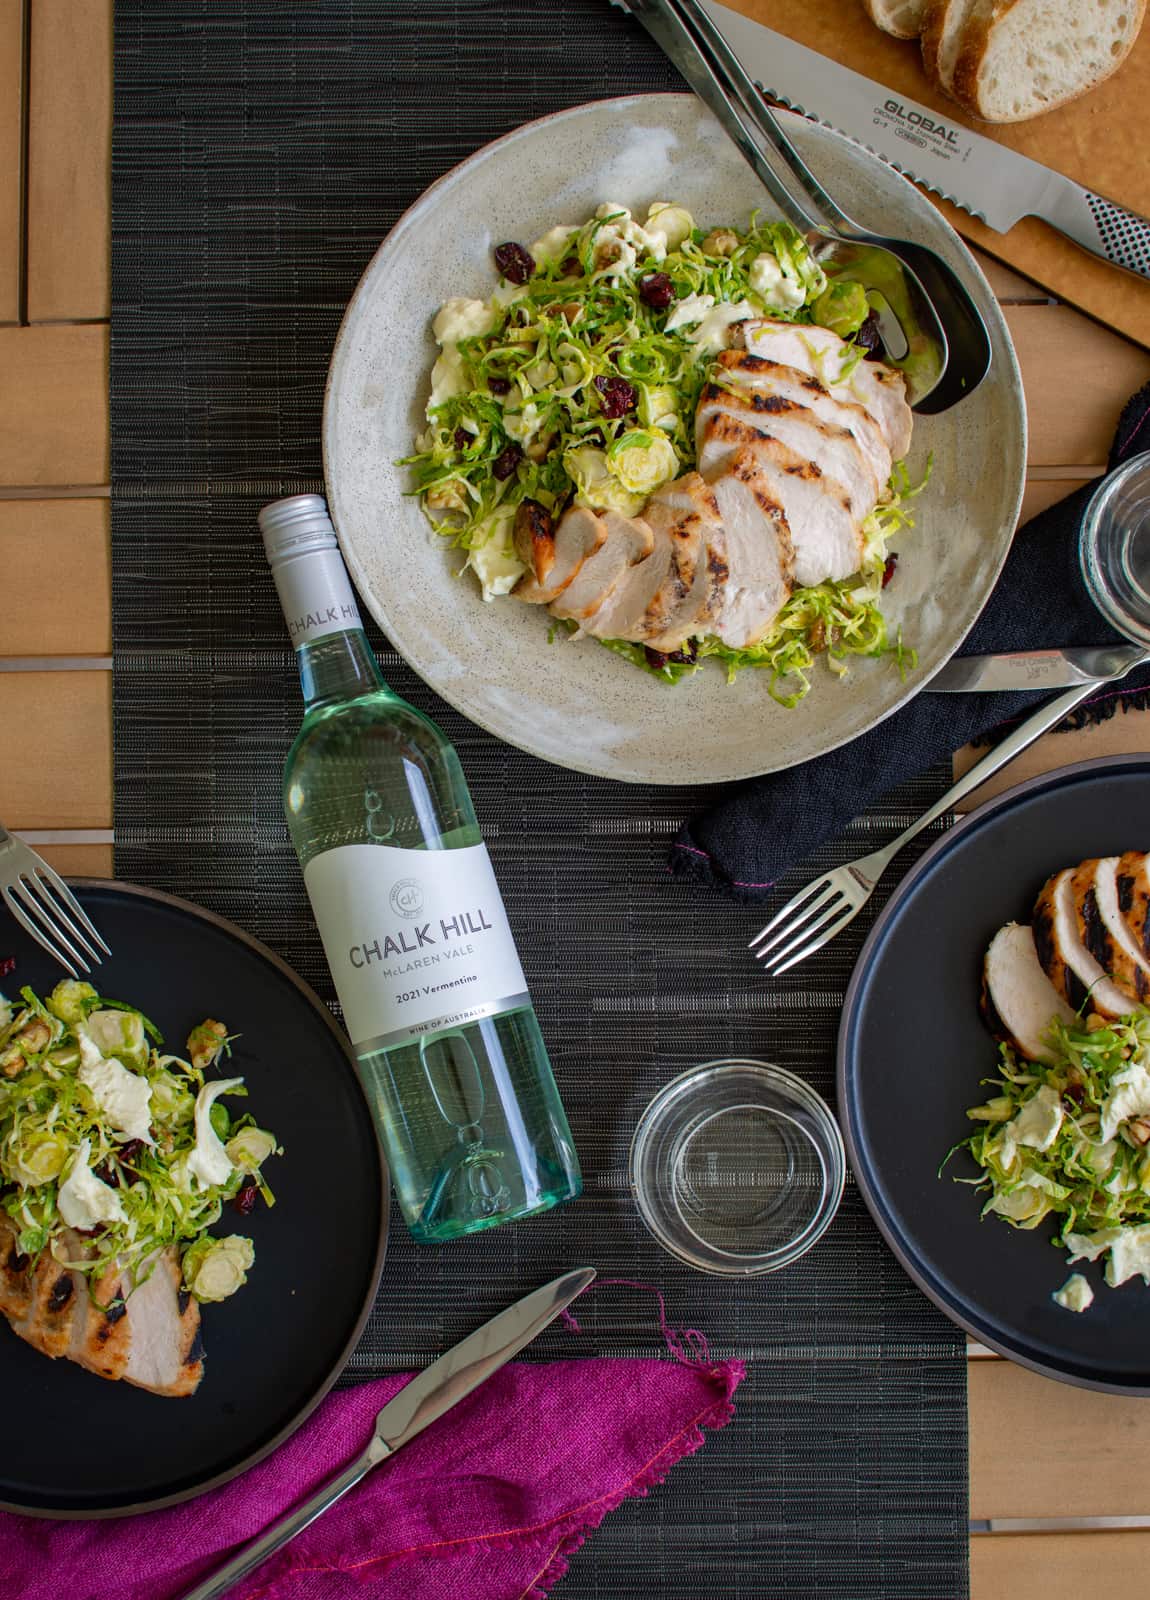 birds eye view of bowls & plates with shaved brussels sprout salad on a table with chalk hill vermentino bottle lying down too 